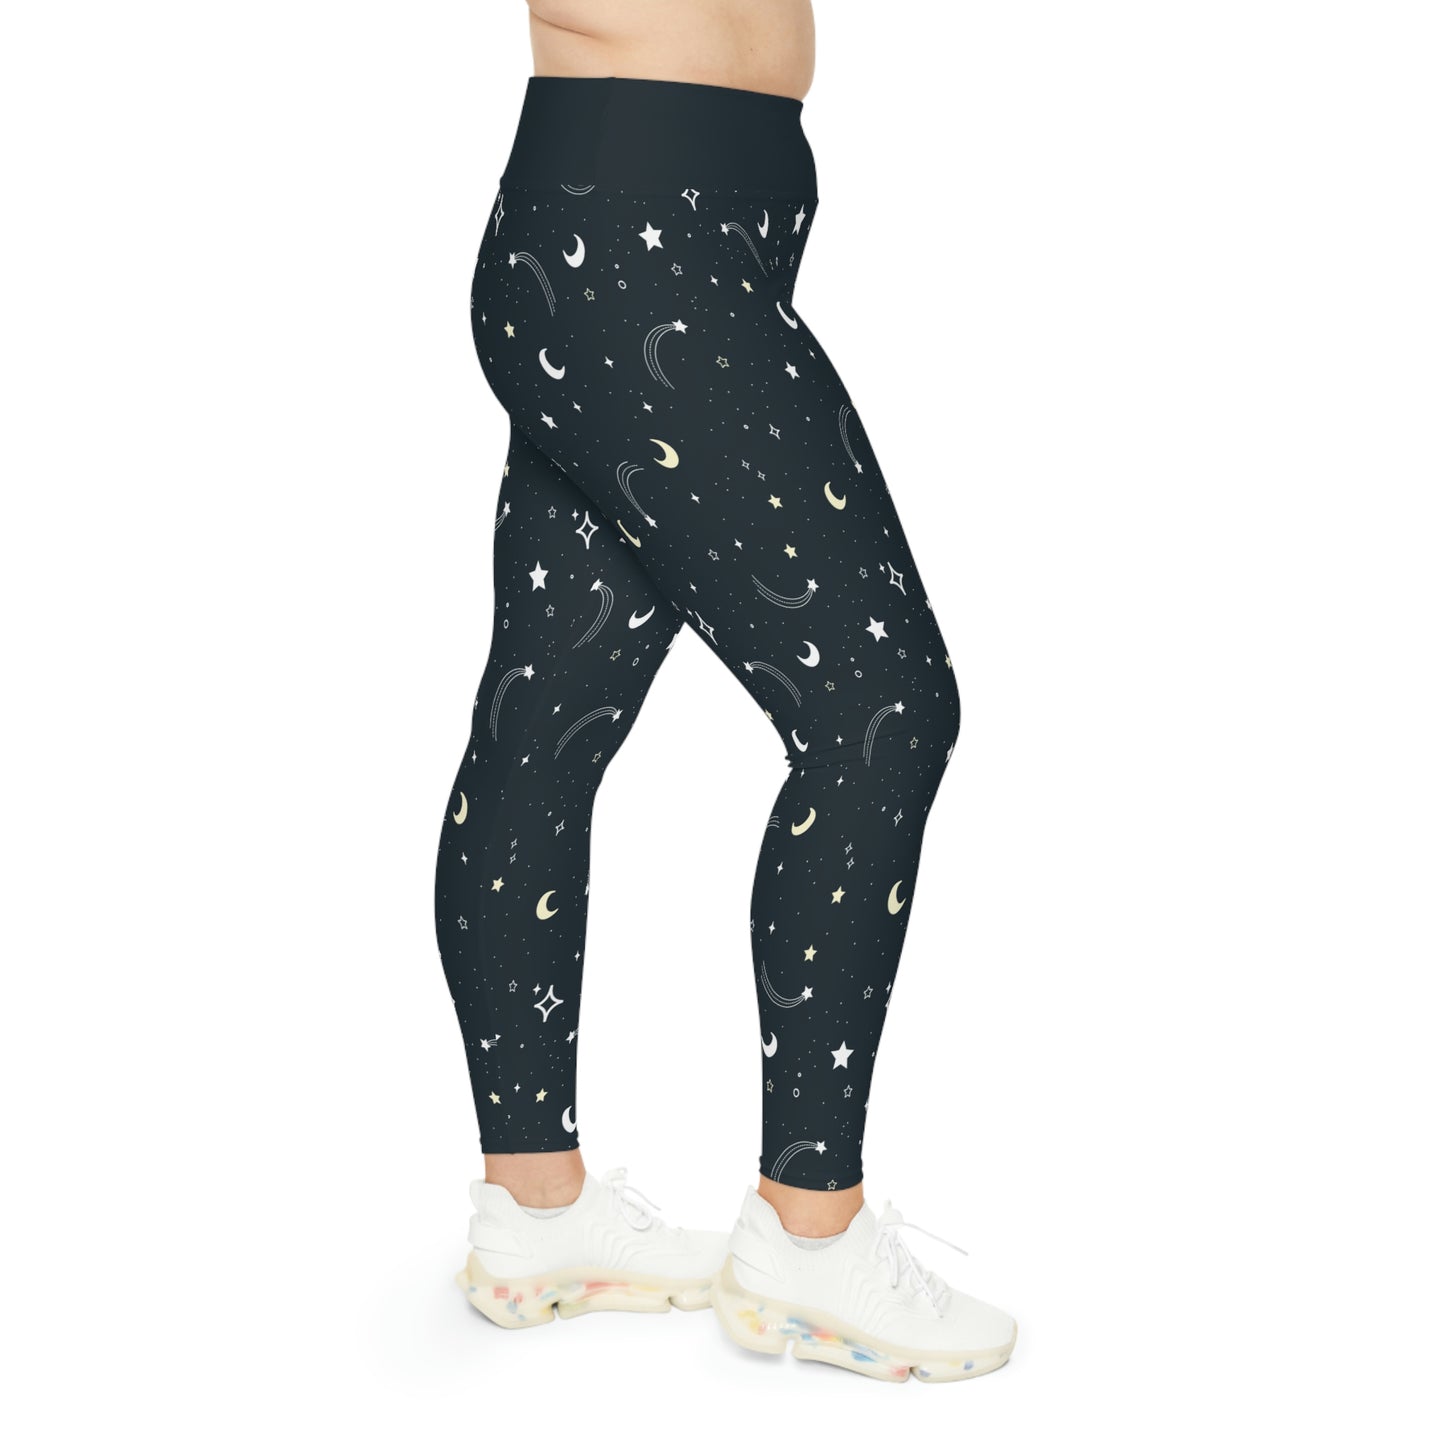 Celestial Moon Stars Plus Size Leggings One of a Kind Unique Workout Activewear tights for Mom fitness, Mothers Day, Girlfriend Christmas Gift